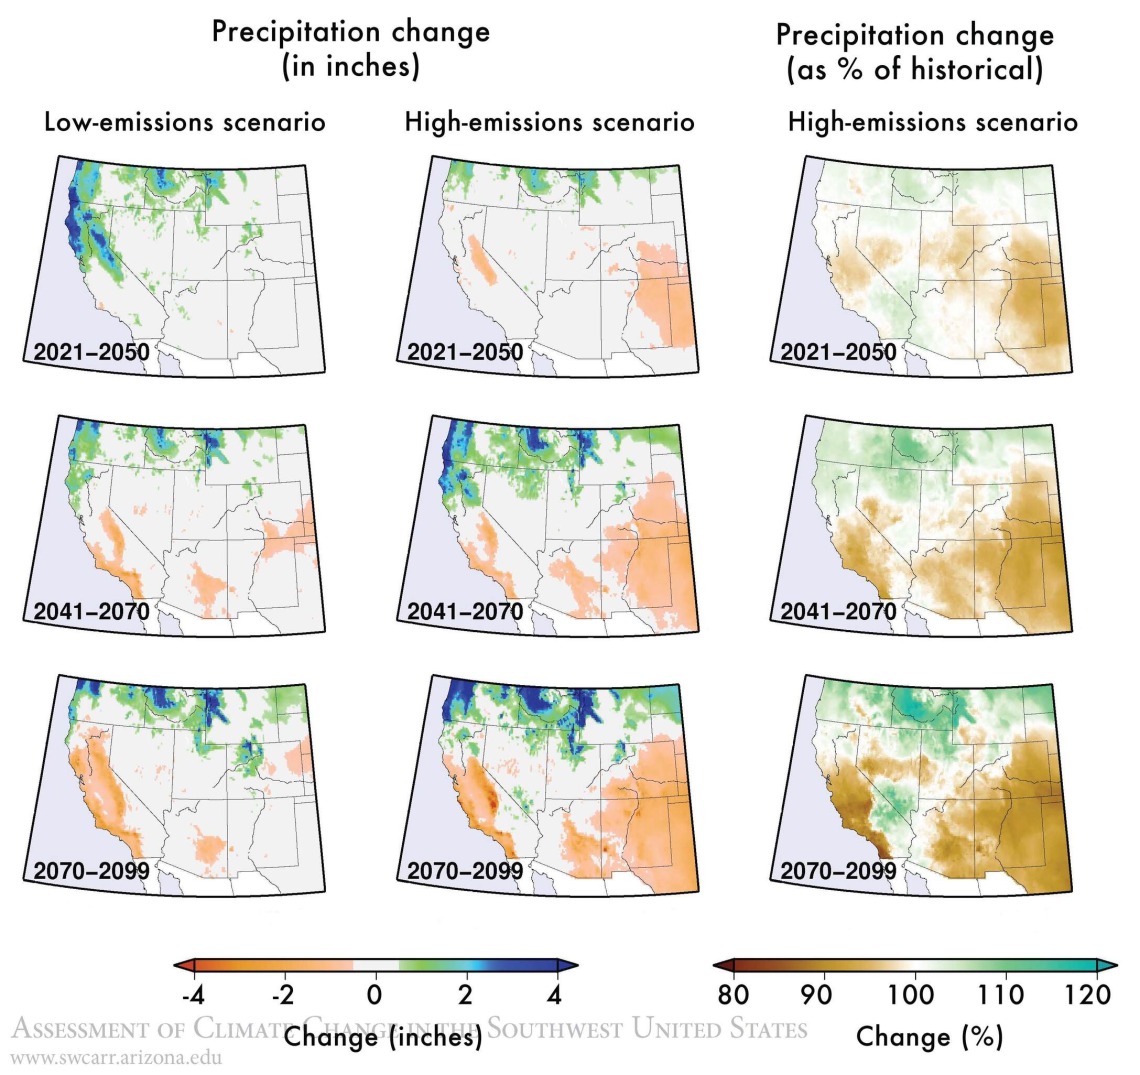 Figure 7 from Chapter 6 of Climate Assessment Report.